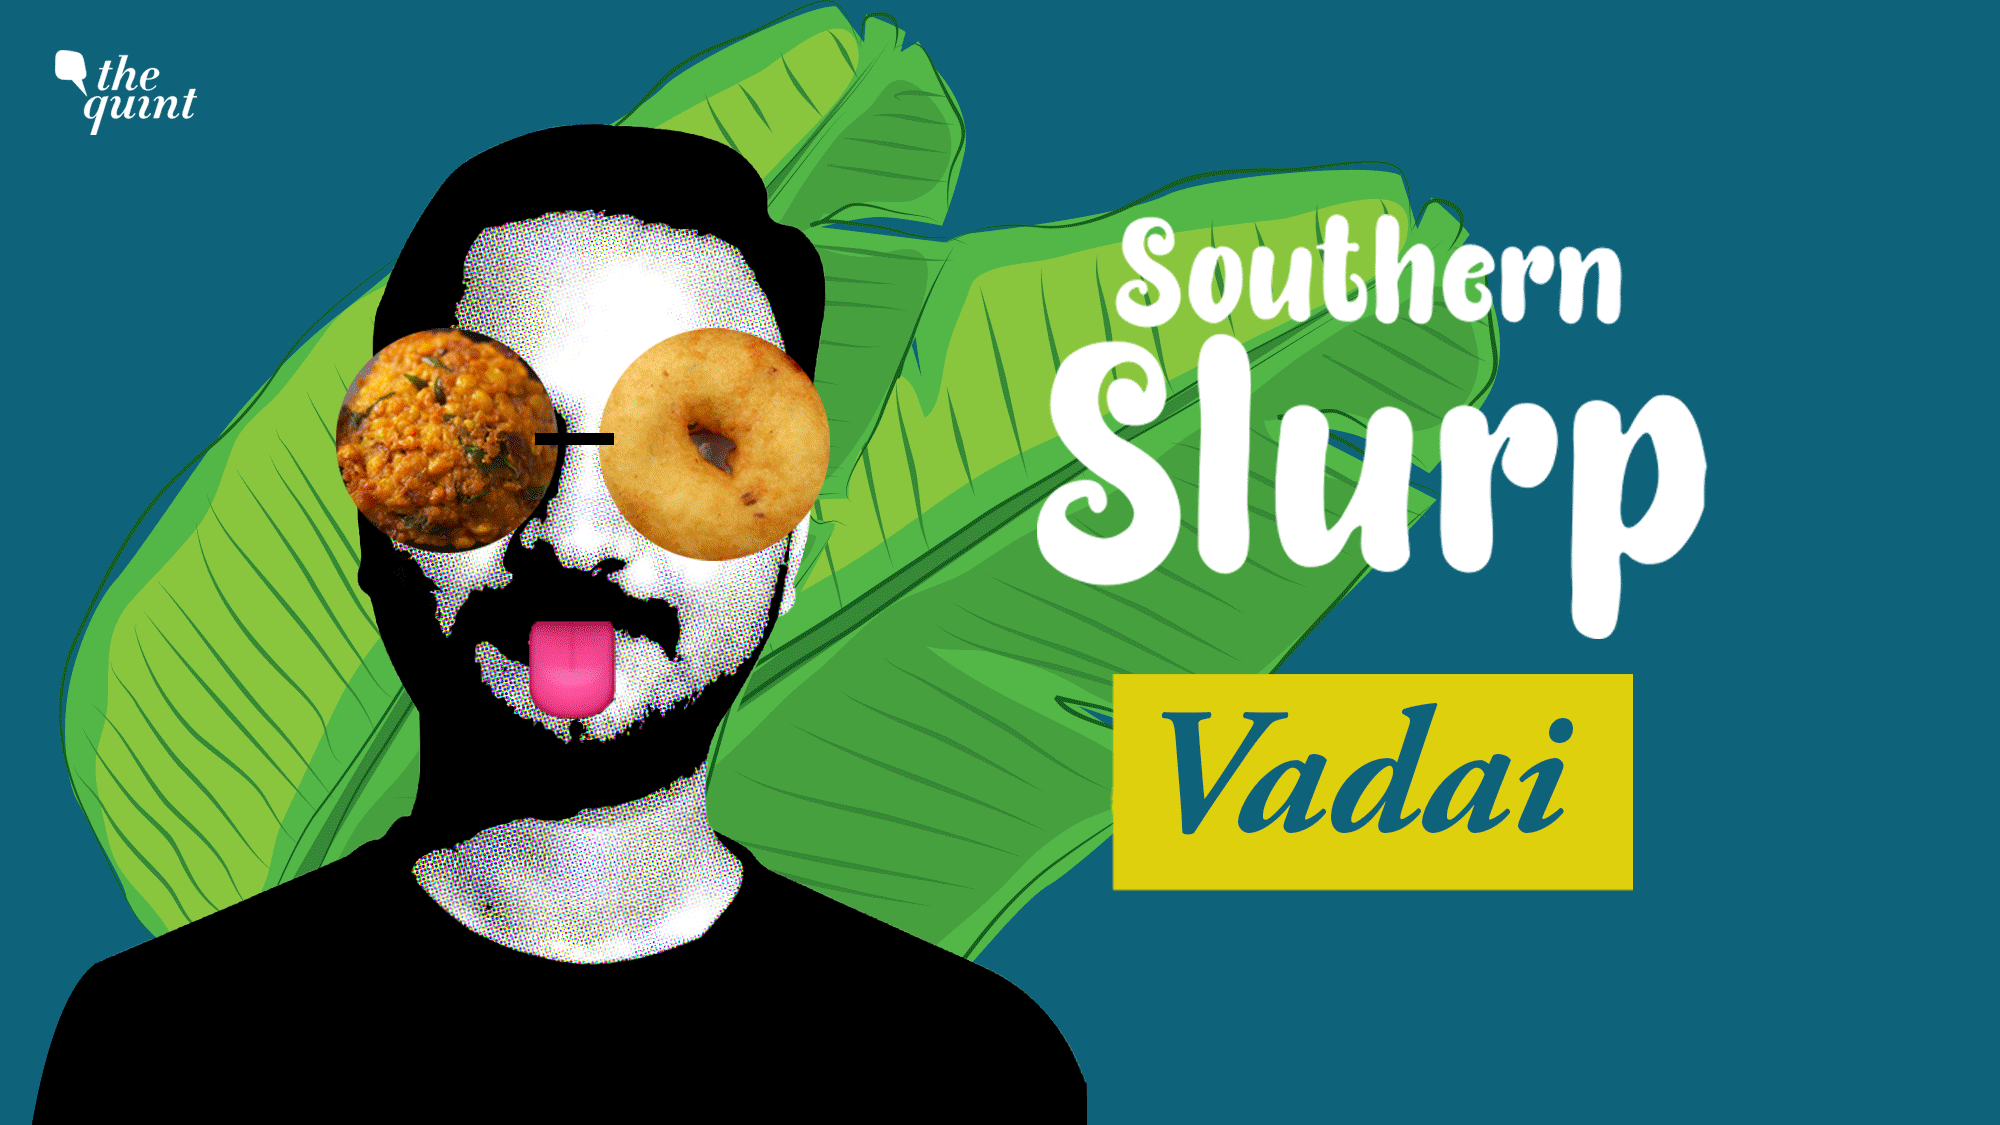 Masaal vadai and the ‘other’ vadai with the hole. What’s not to like?